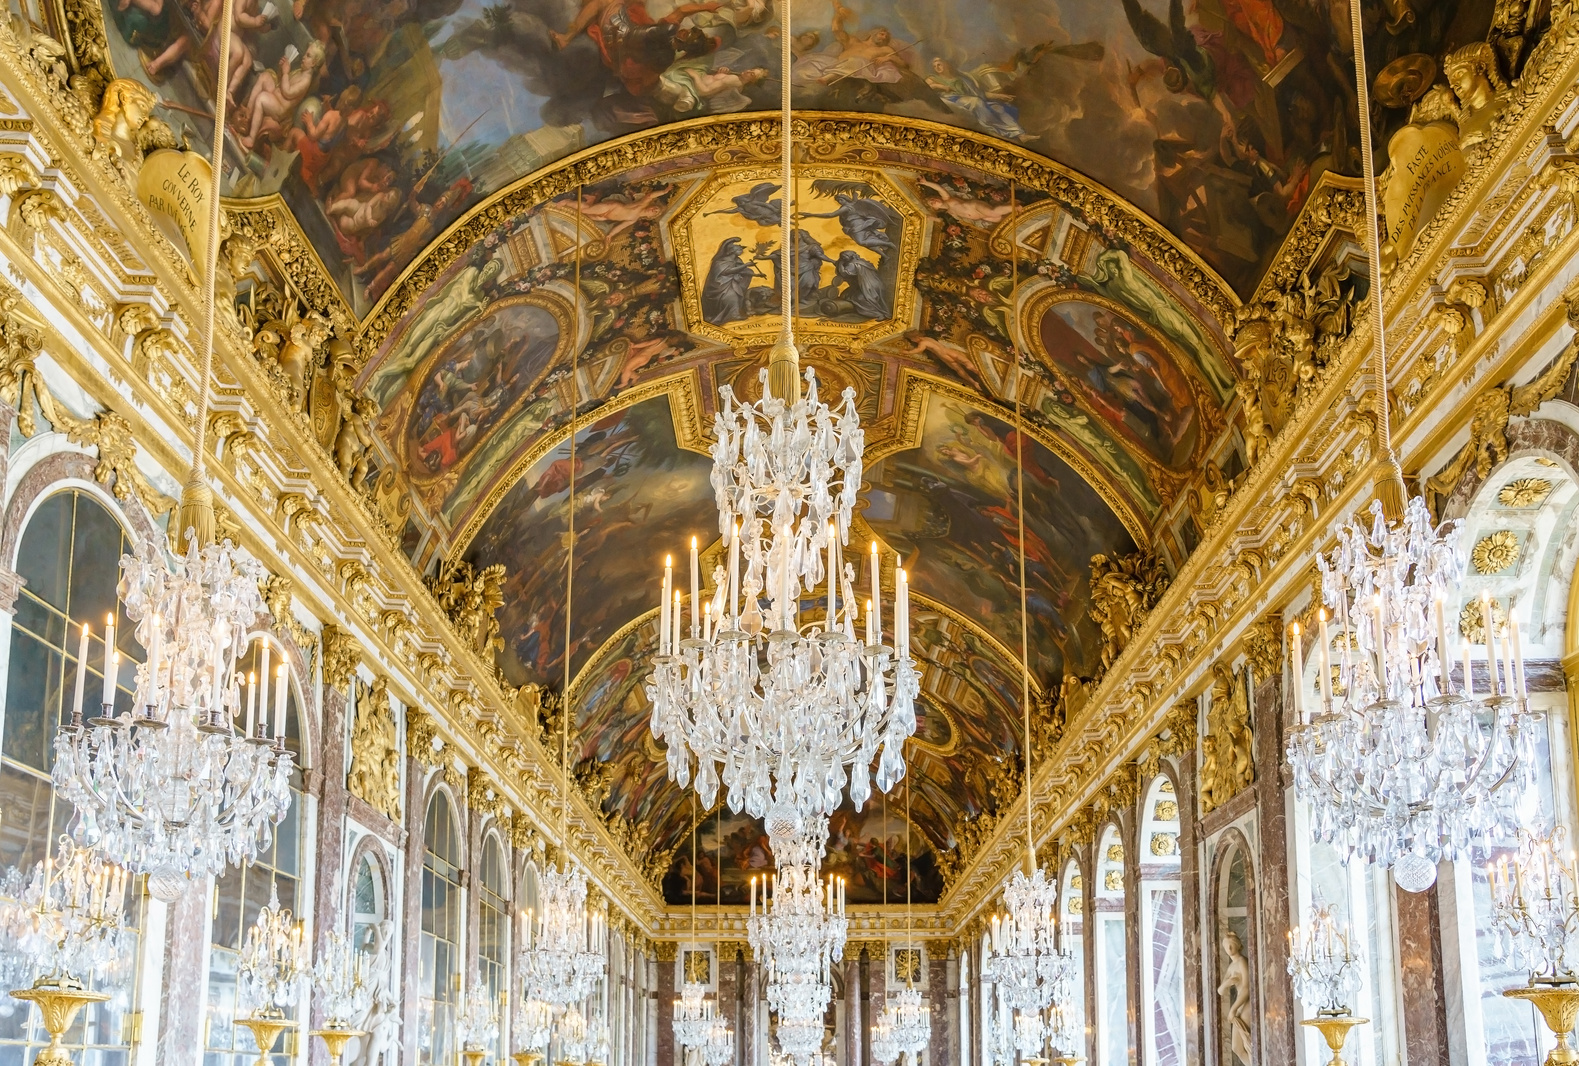 Hall of Mirrors of the Royal Palace of Versailles, France